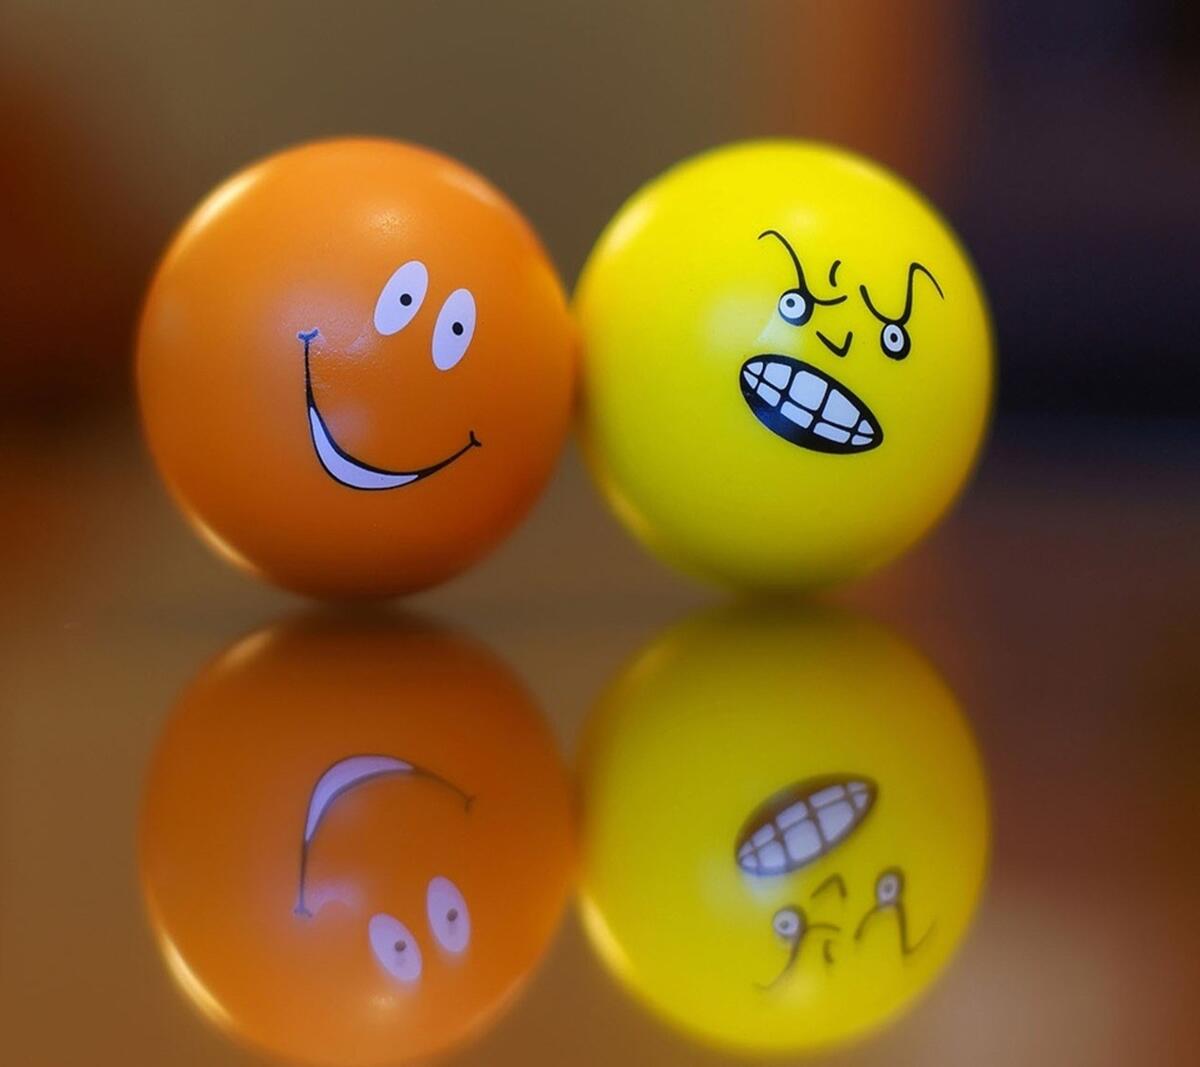 Funny faces on balloons